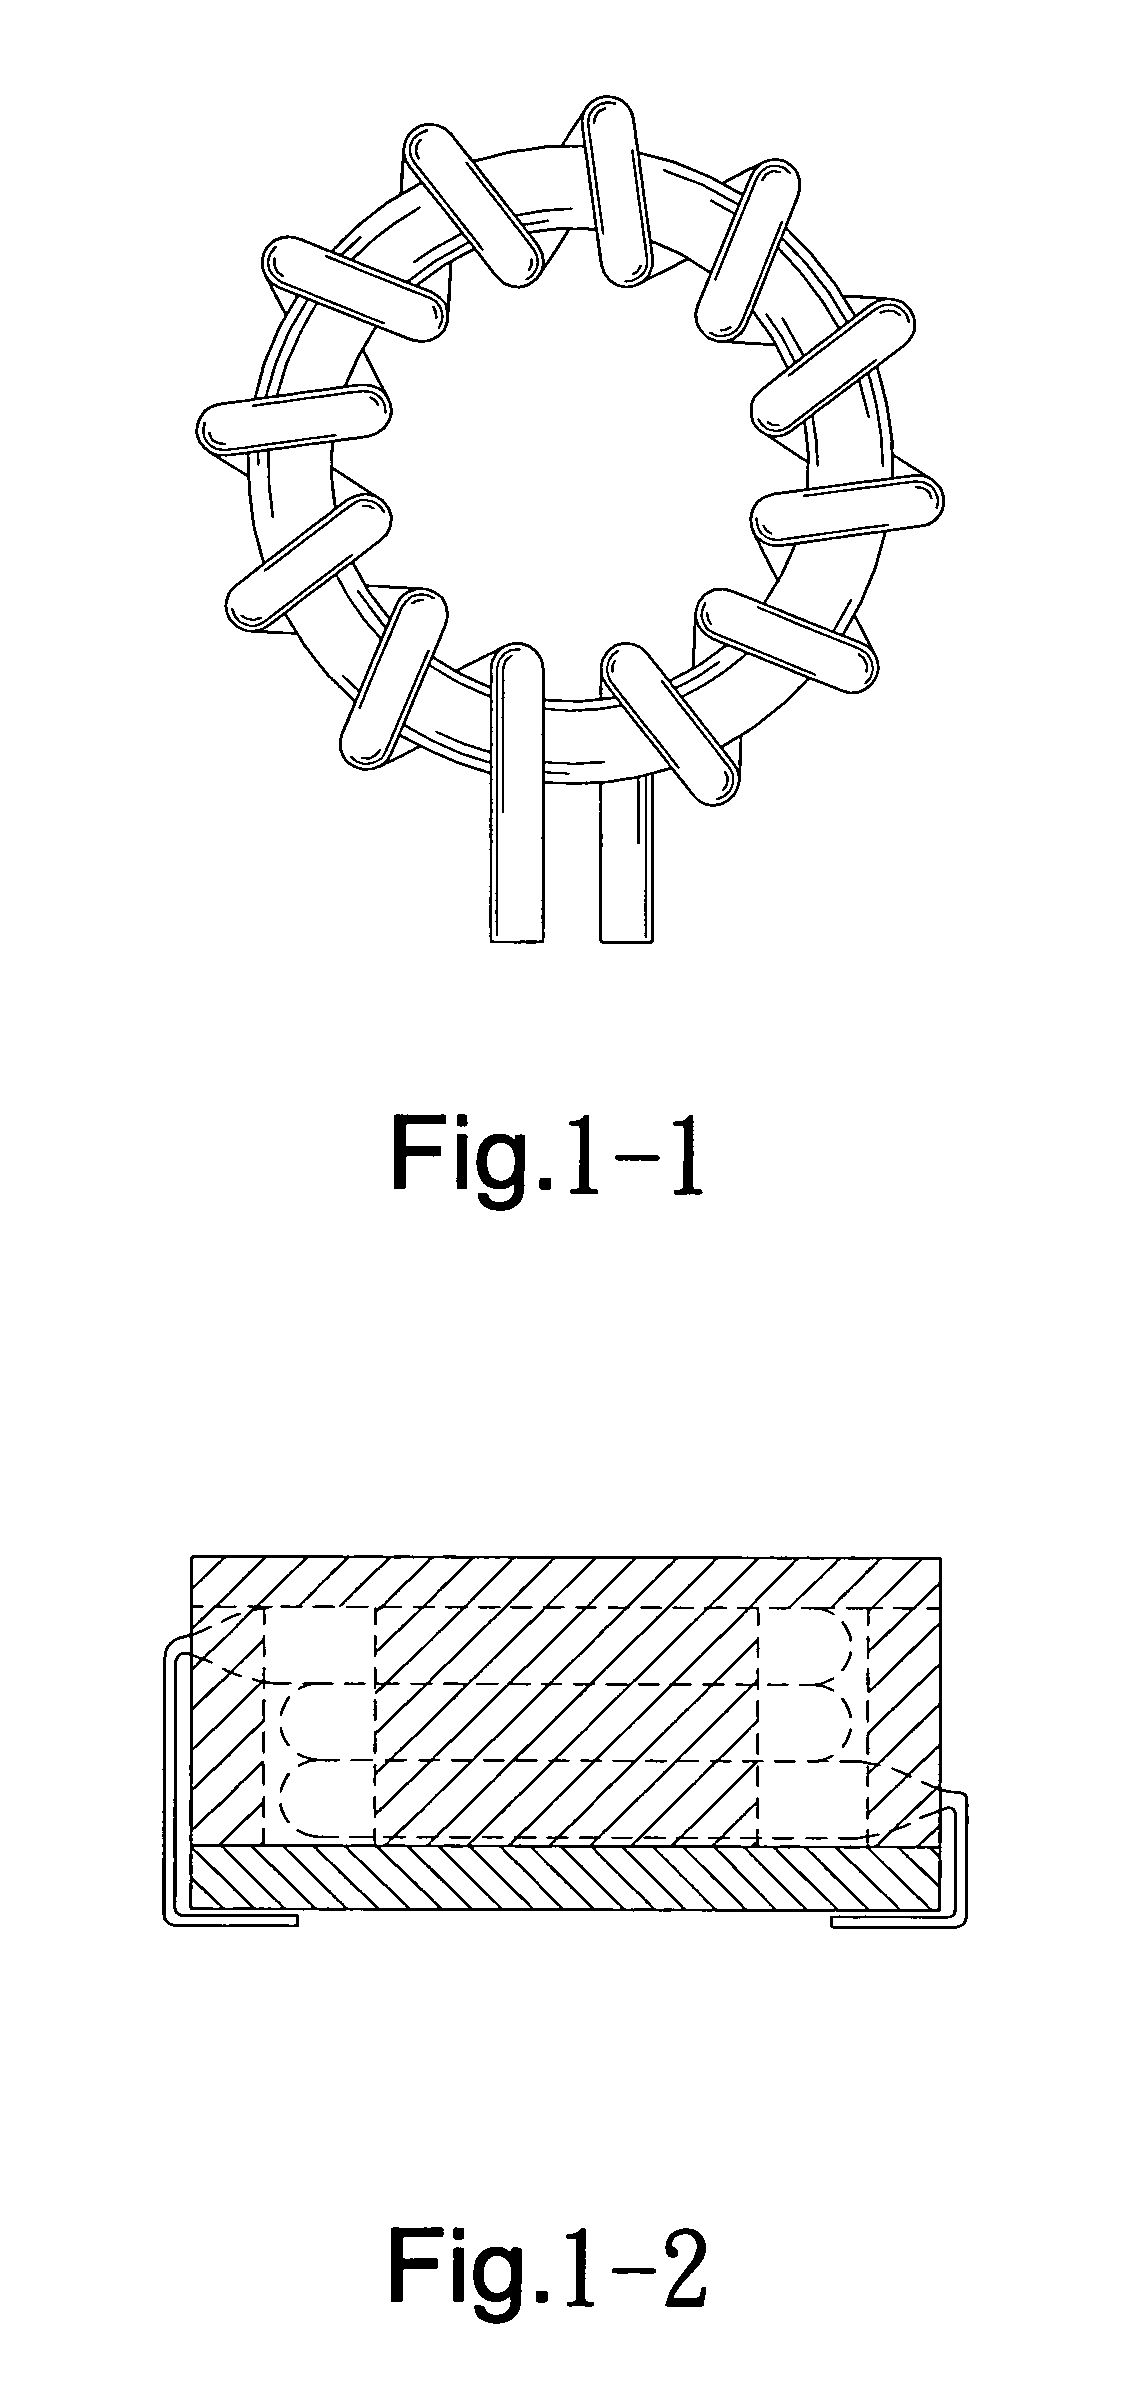 Method of material selection and forming to solve aging of one inductor's iron core